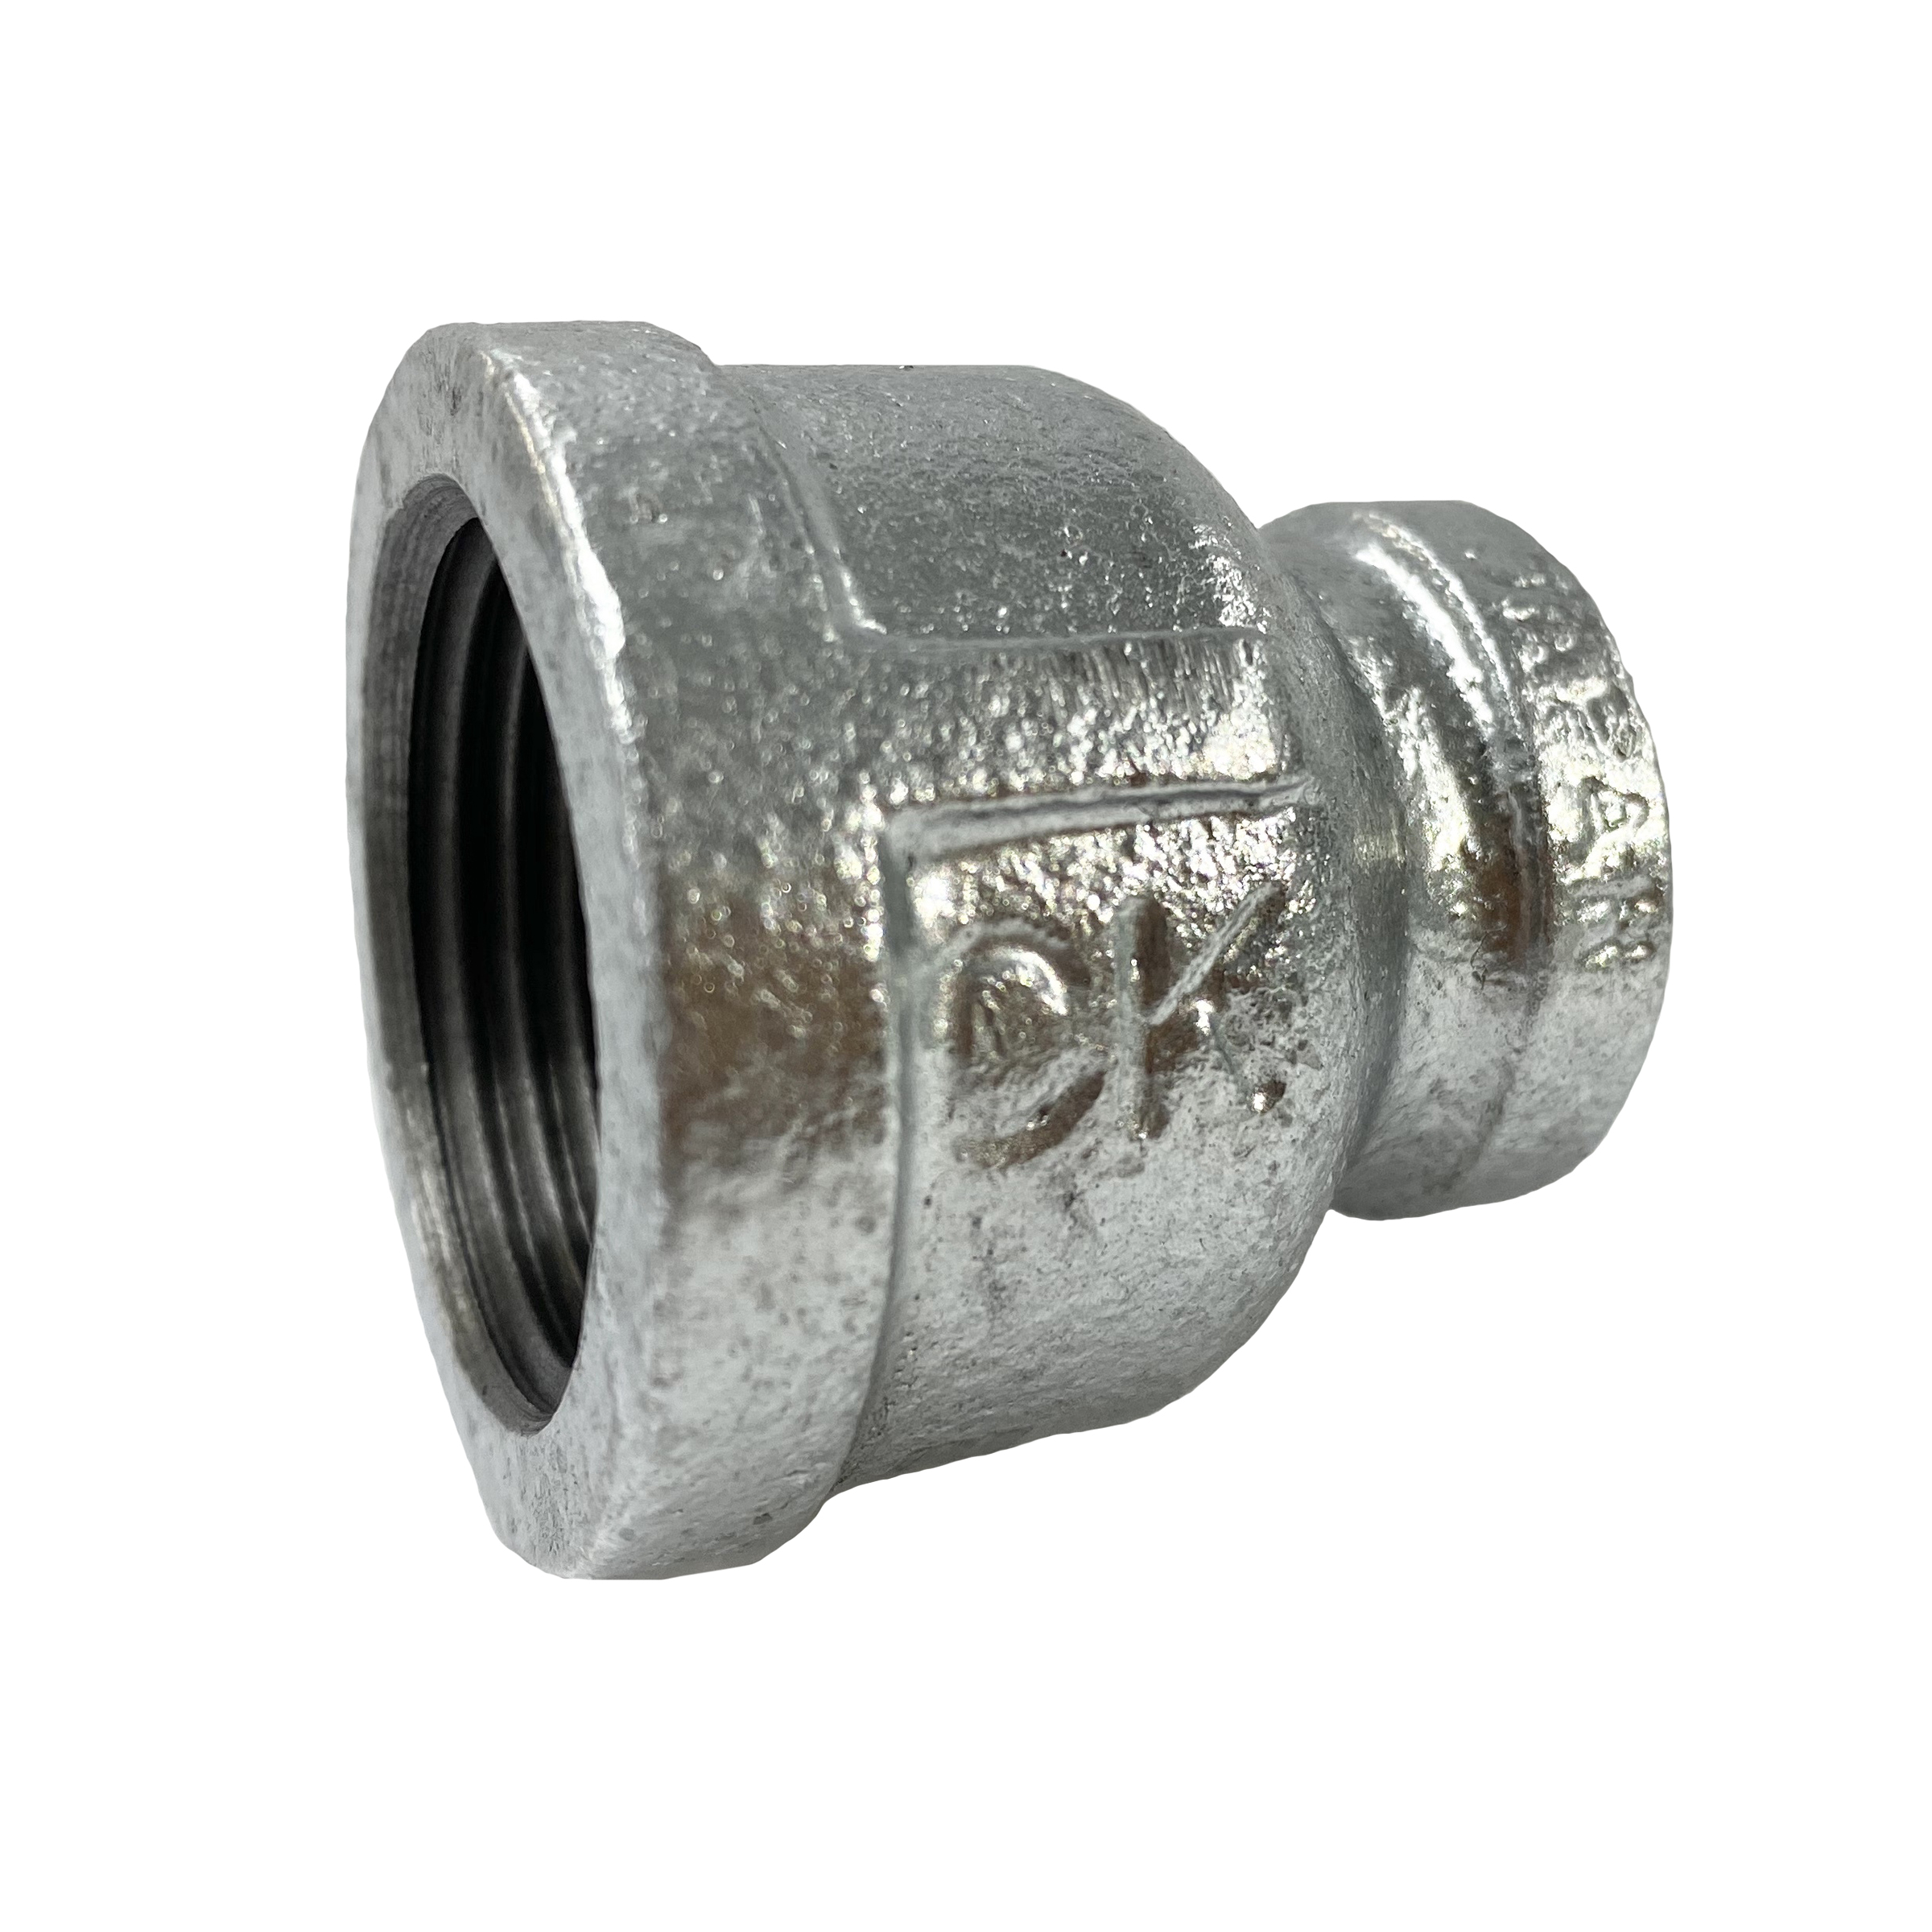 CK Fittings - Screw-in Type Malleable Cast Iron Pipe Fitting - Socket with Different Diameters with Band